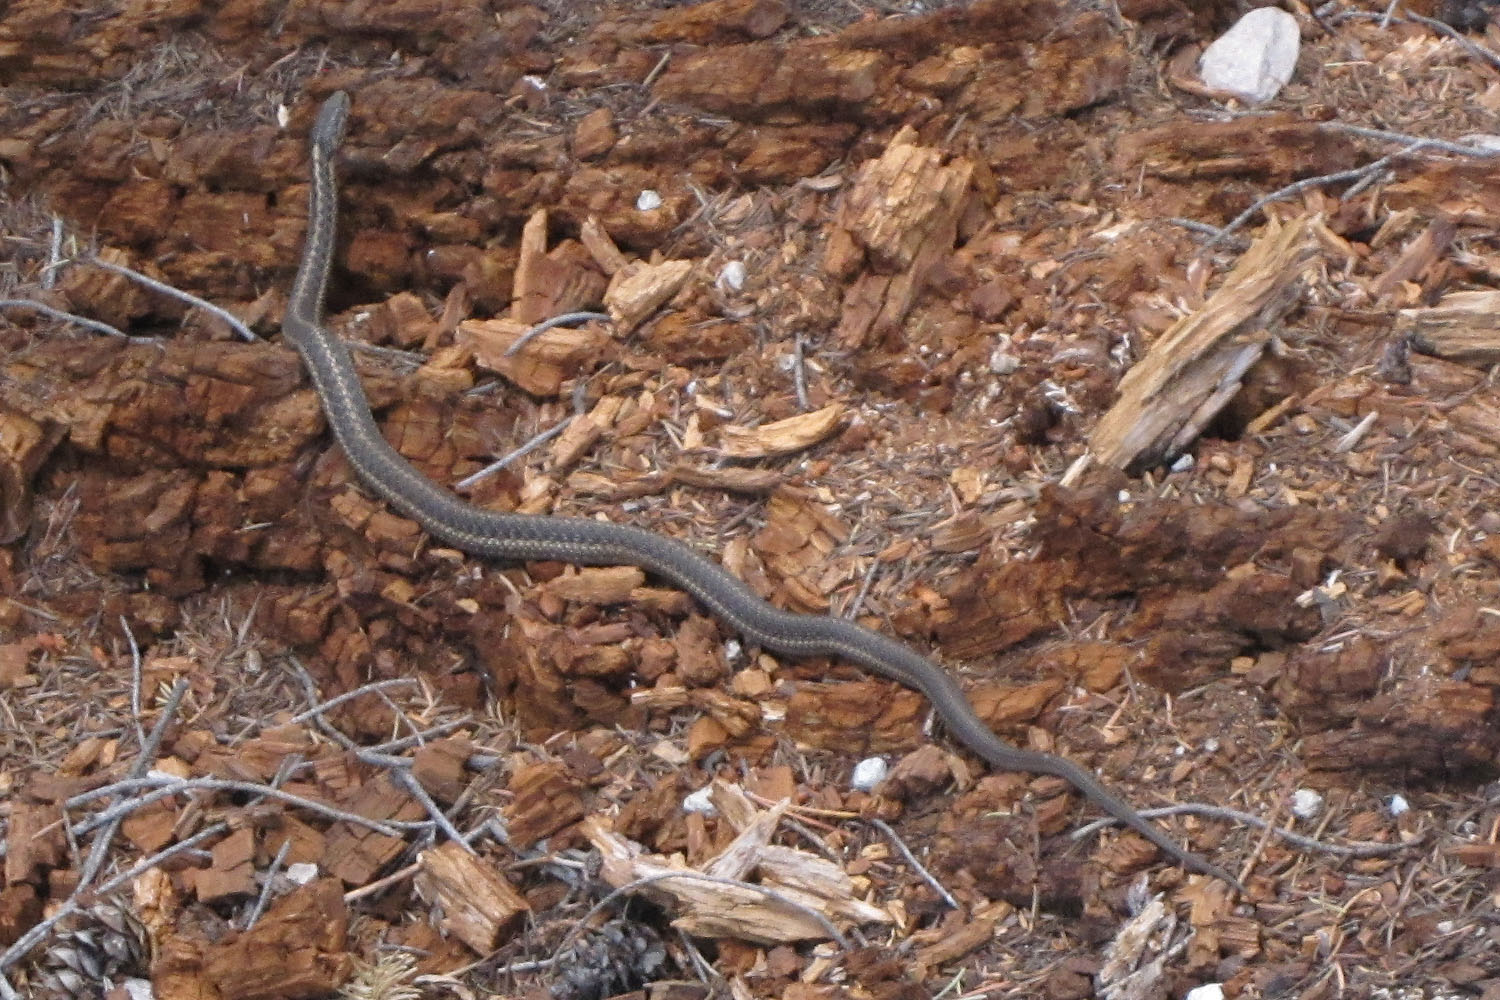 a close - up po of a snake crawling on the ground